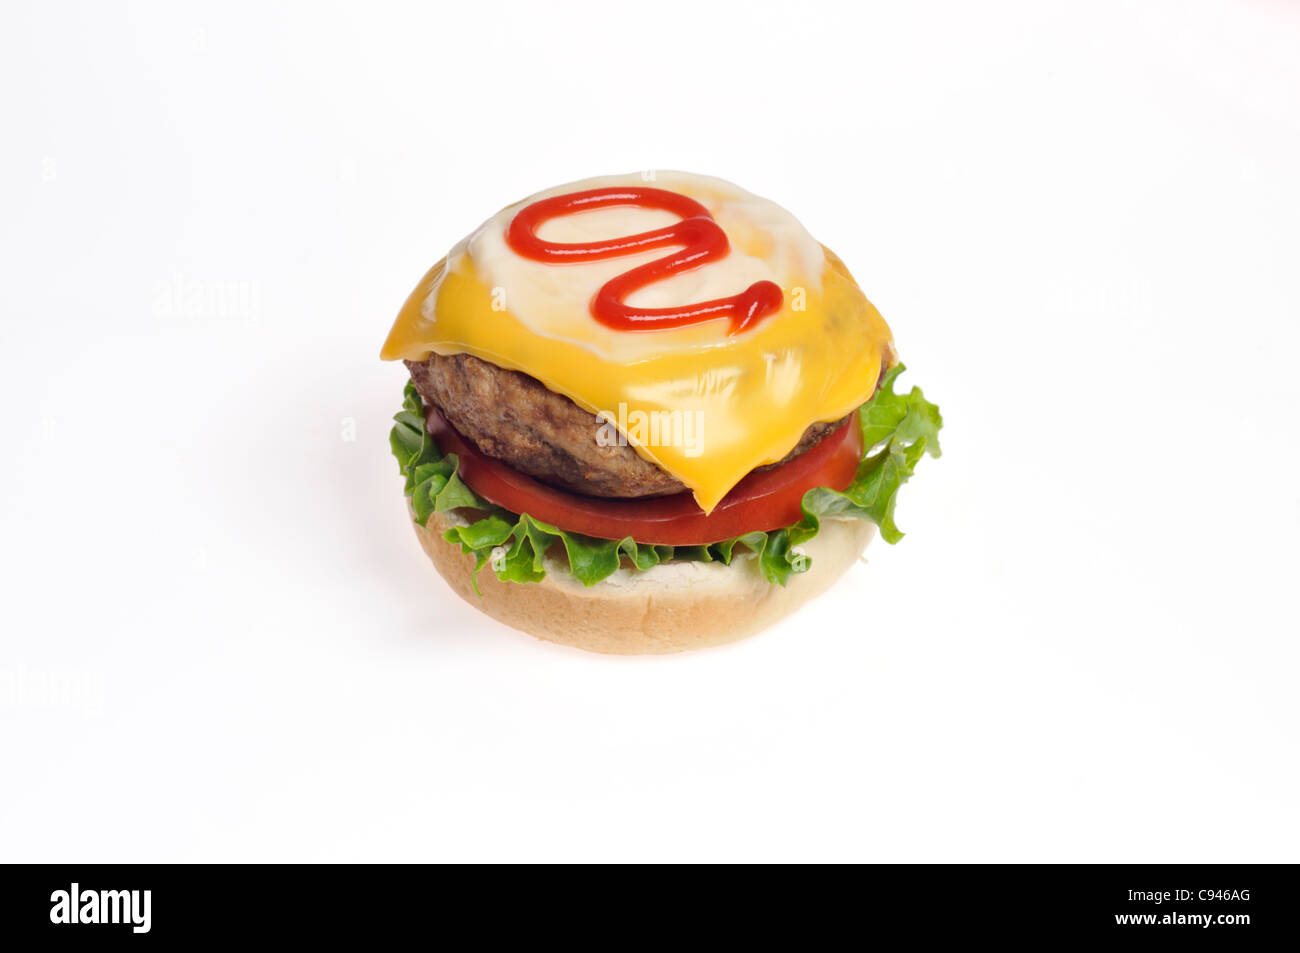 Turkey burger with cheese, lettuce and tomato topped with ketchup open faced on a bread roll on white background cutout. Stock Photo